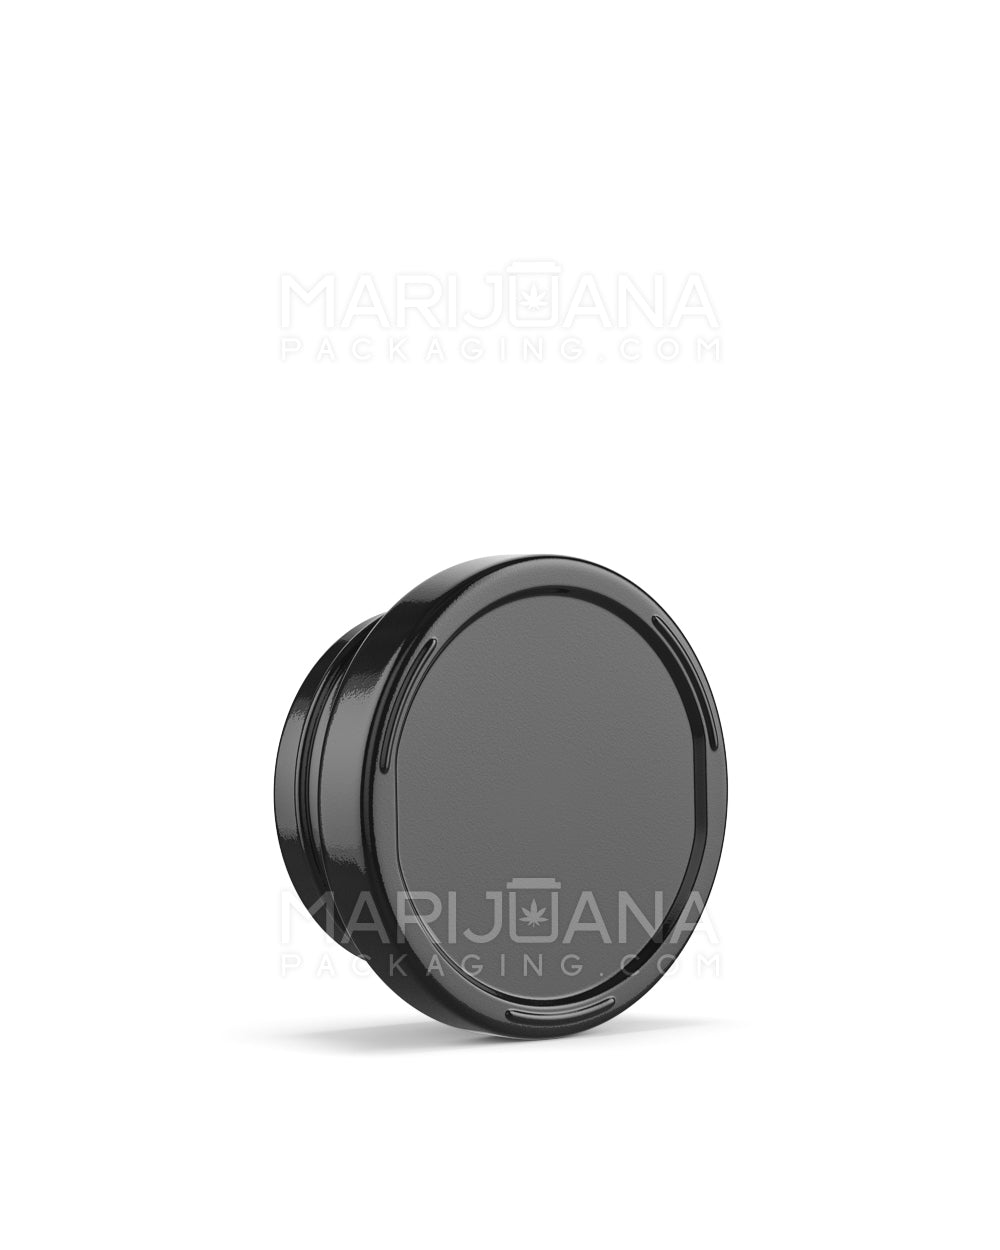 Child Resistant | Black Glass Concentrate Jar with Black Cap | 38mm - 9mL - 320 Count - 5